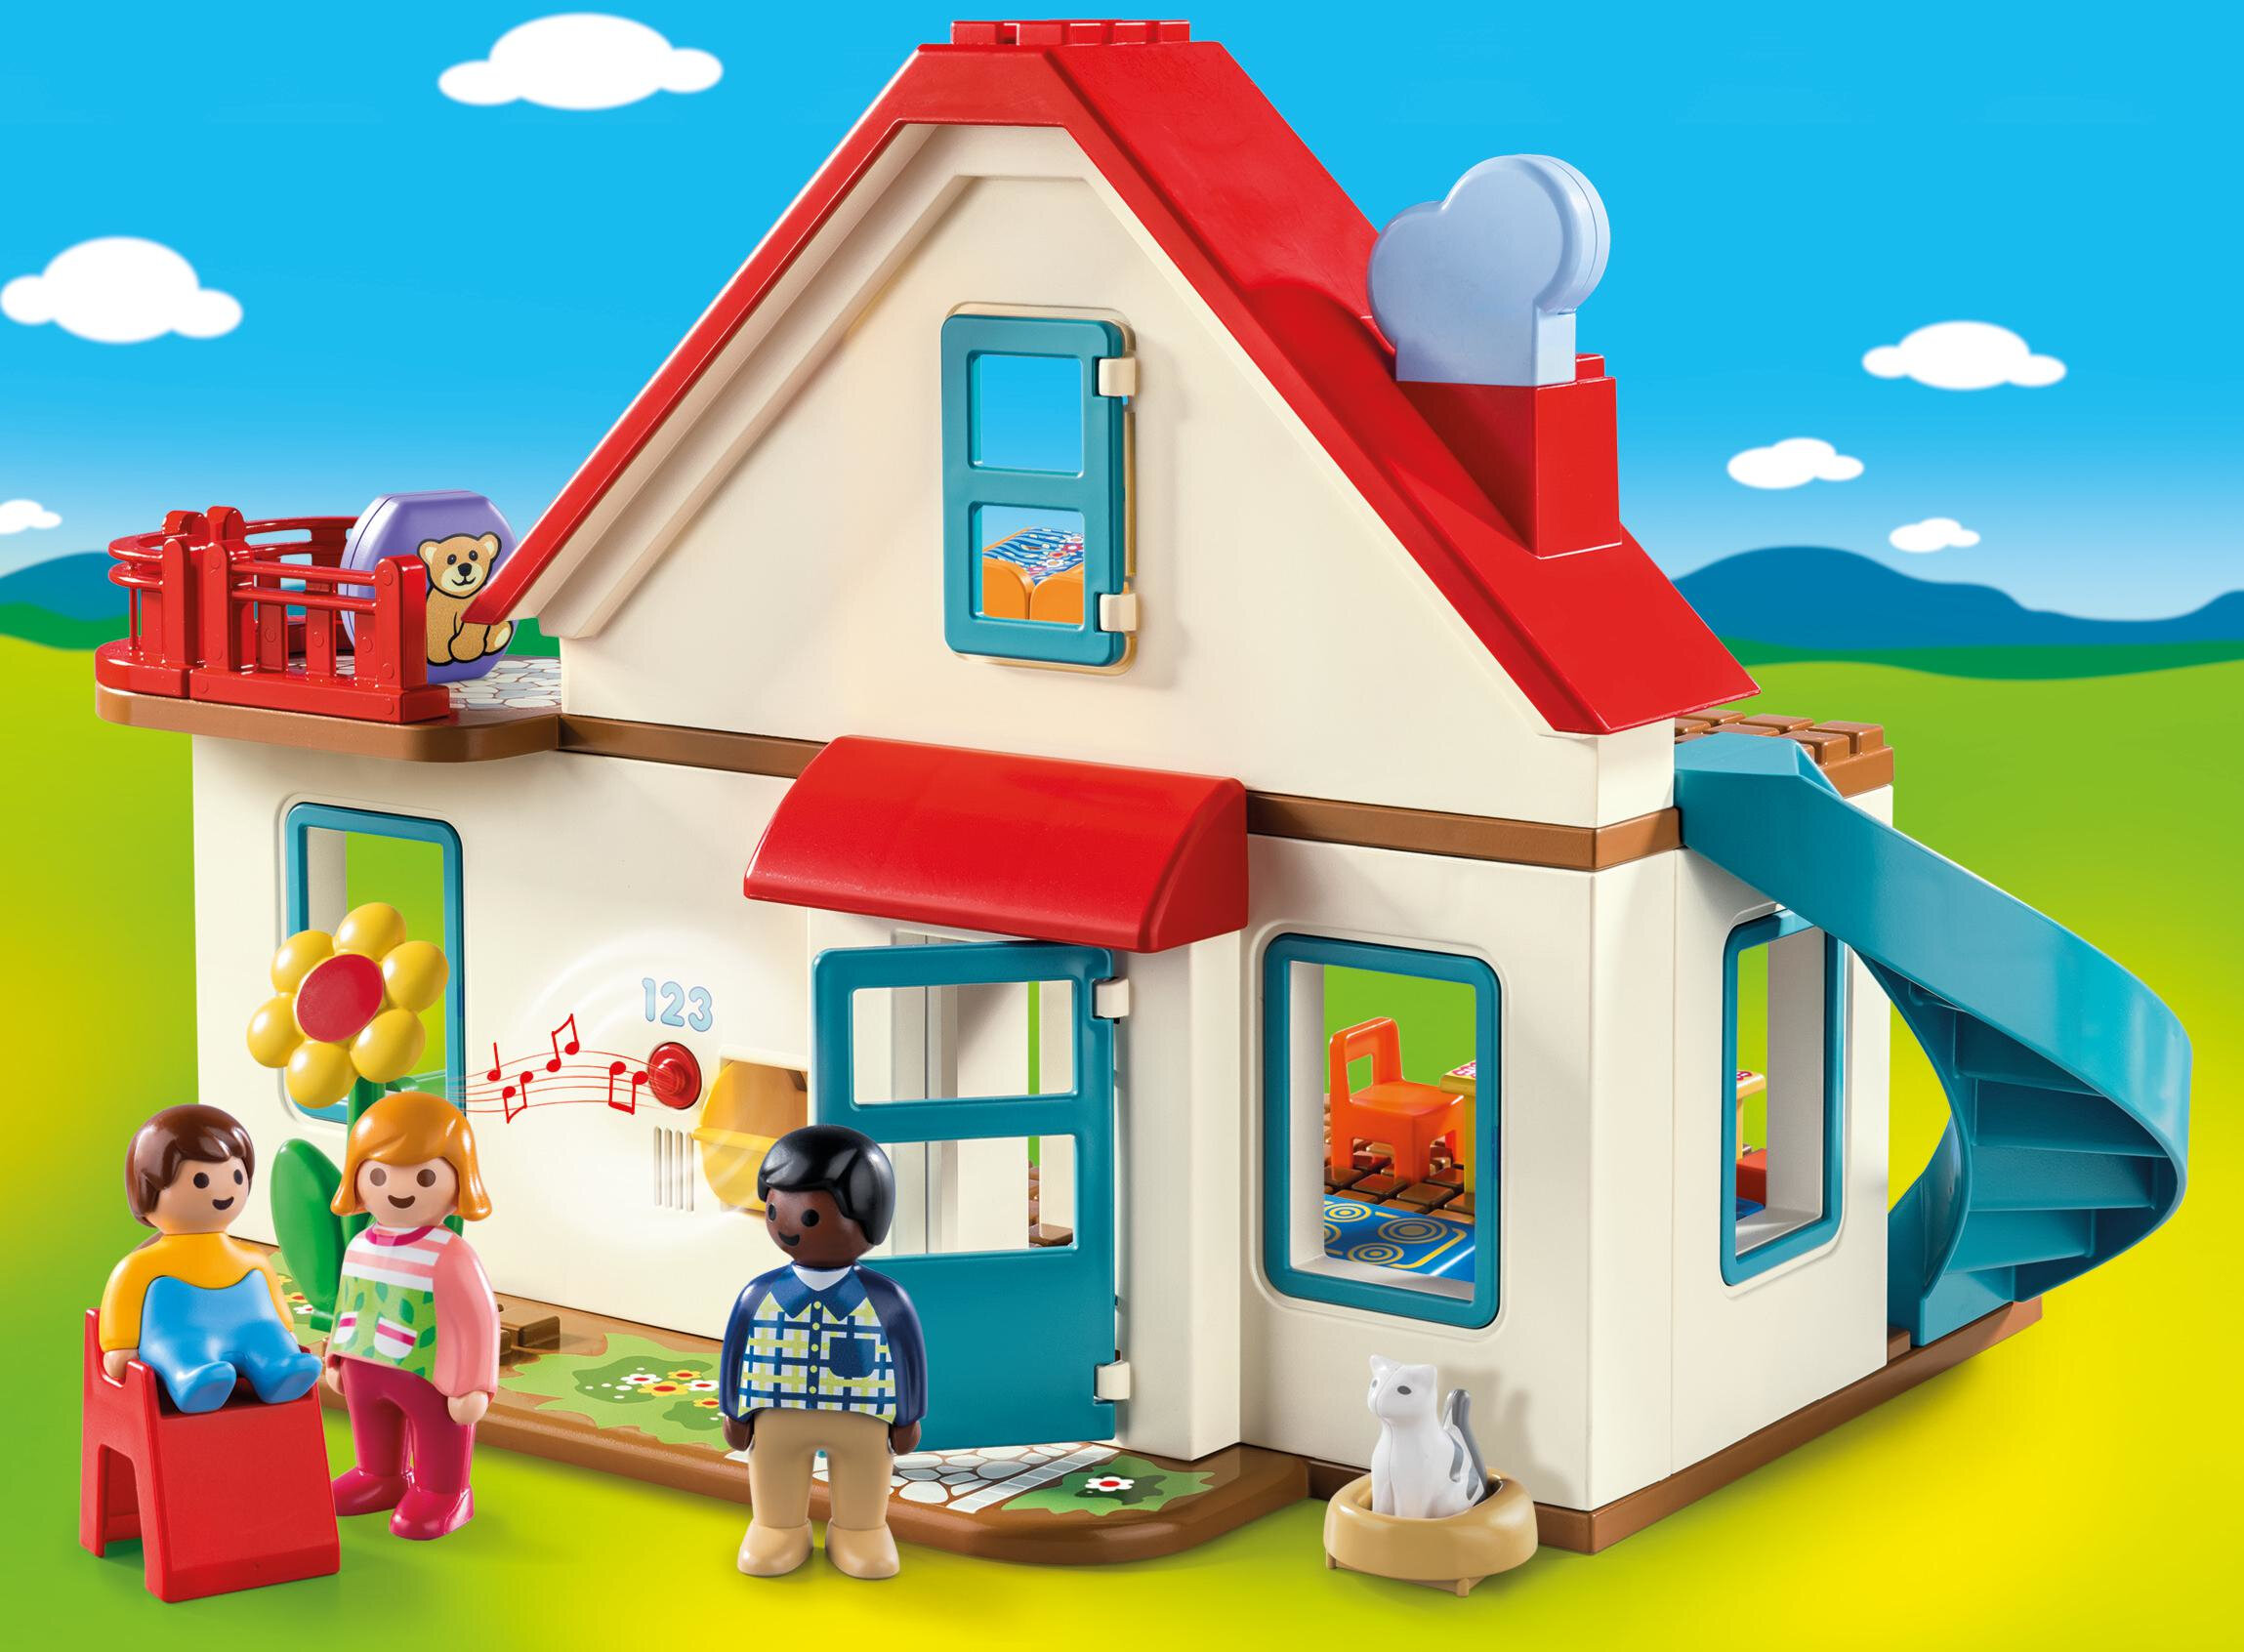 Playmobil 1.2.3 Family Home - image 3 of 5